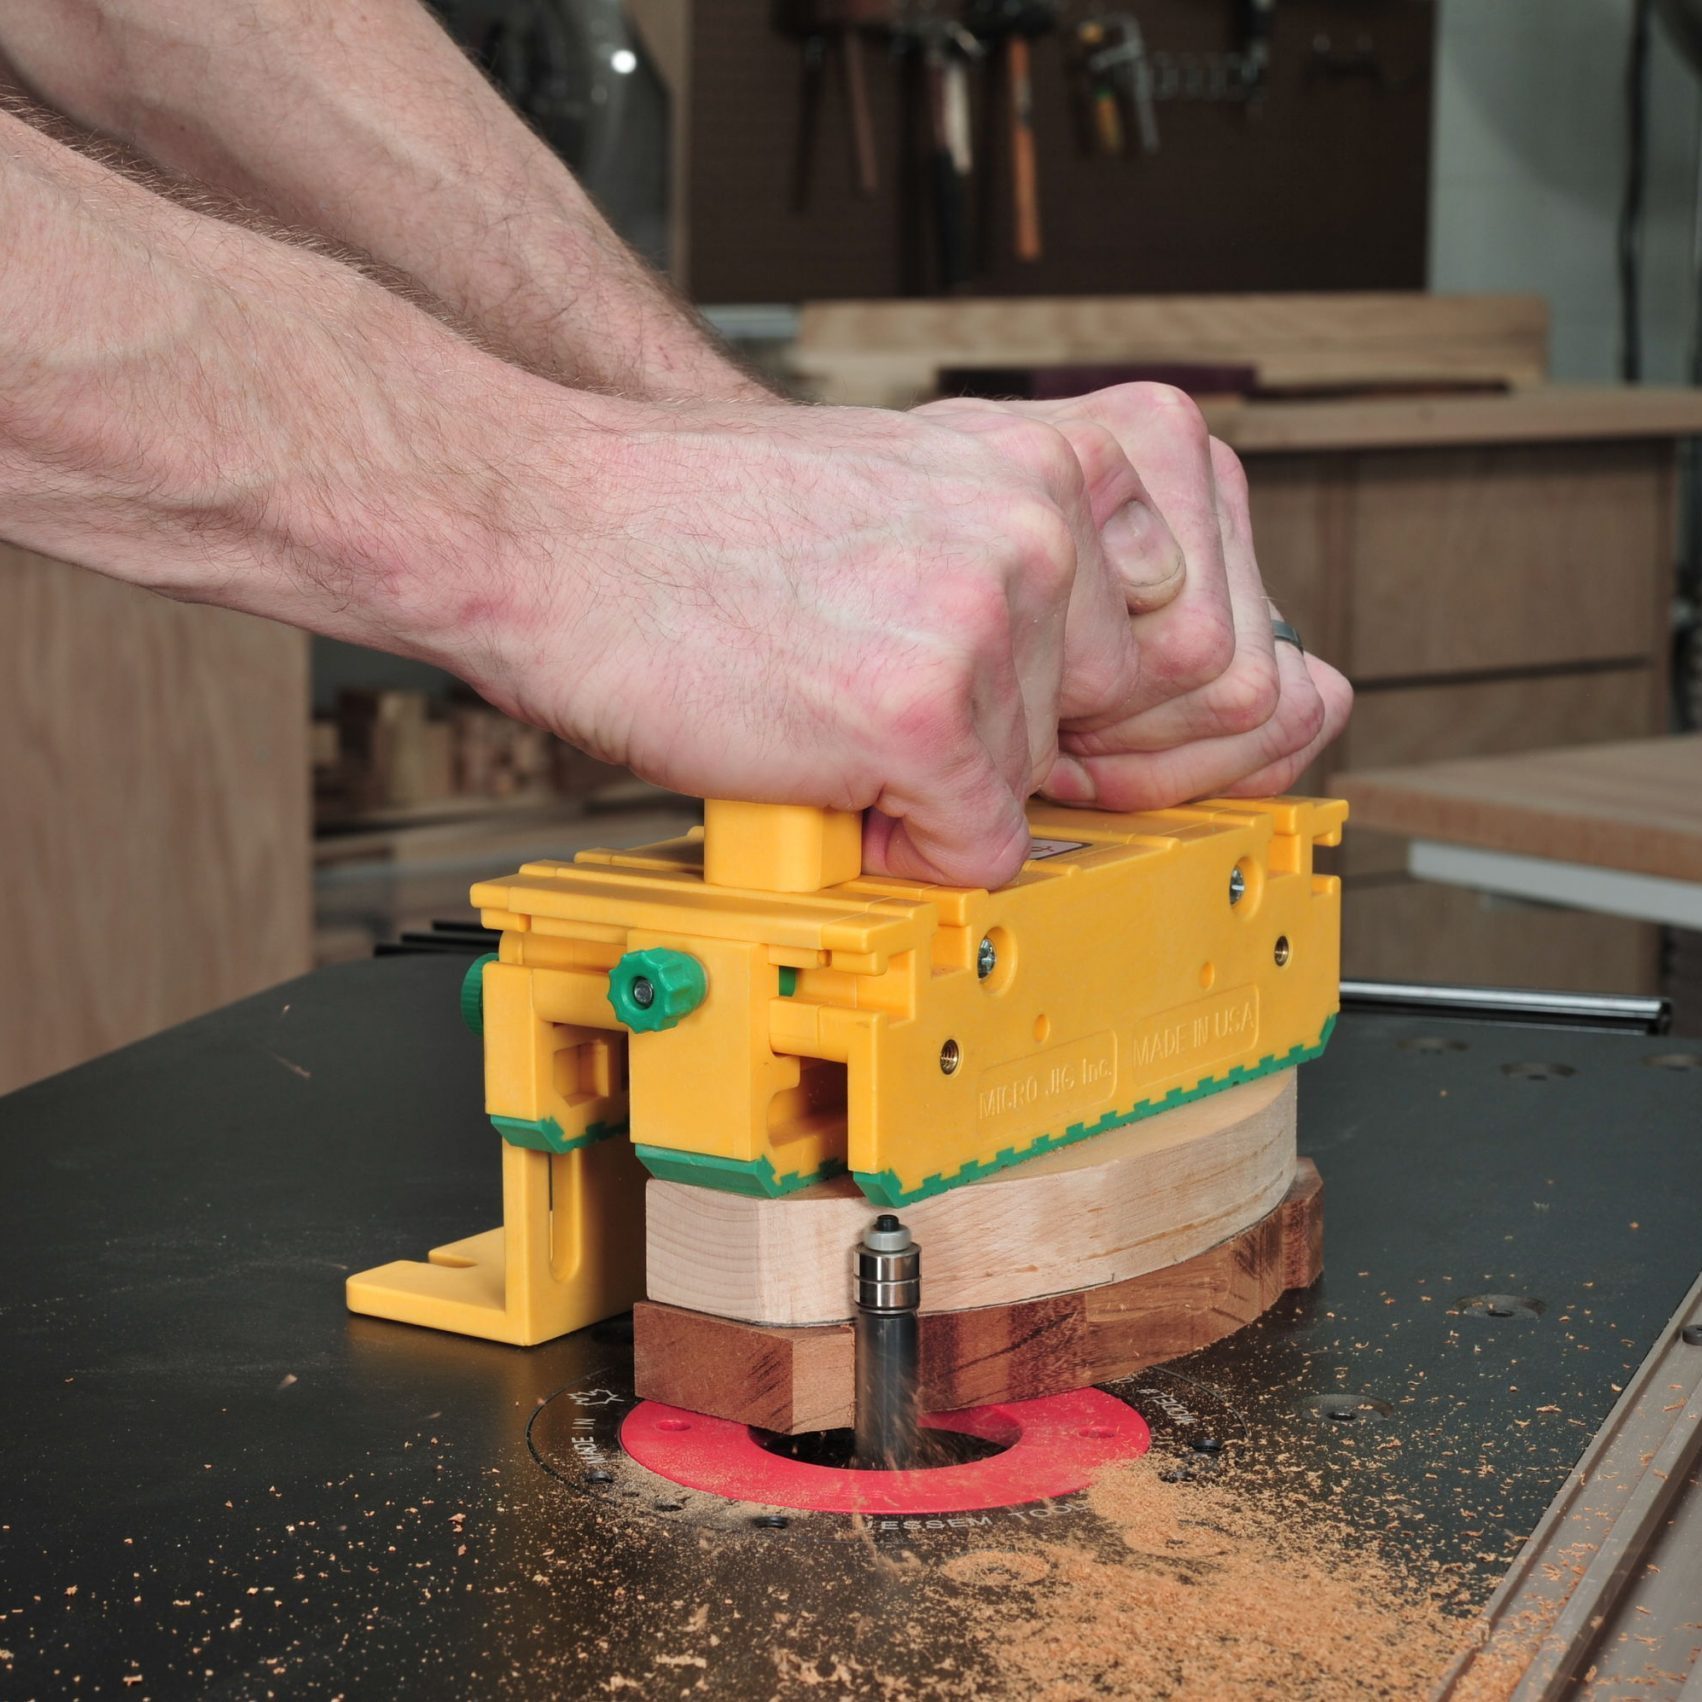 Handyman Gift Picks: Top Tools for the DIY Enthusiast You Know